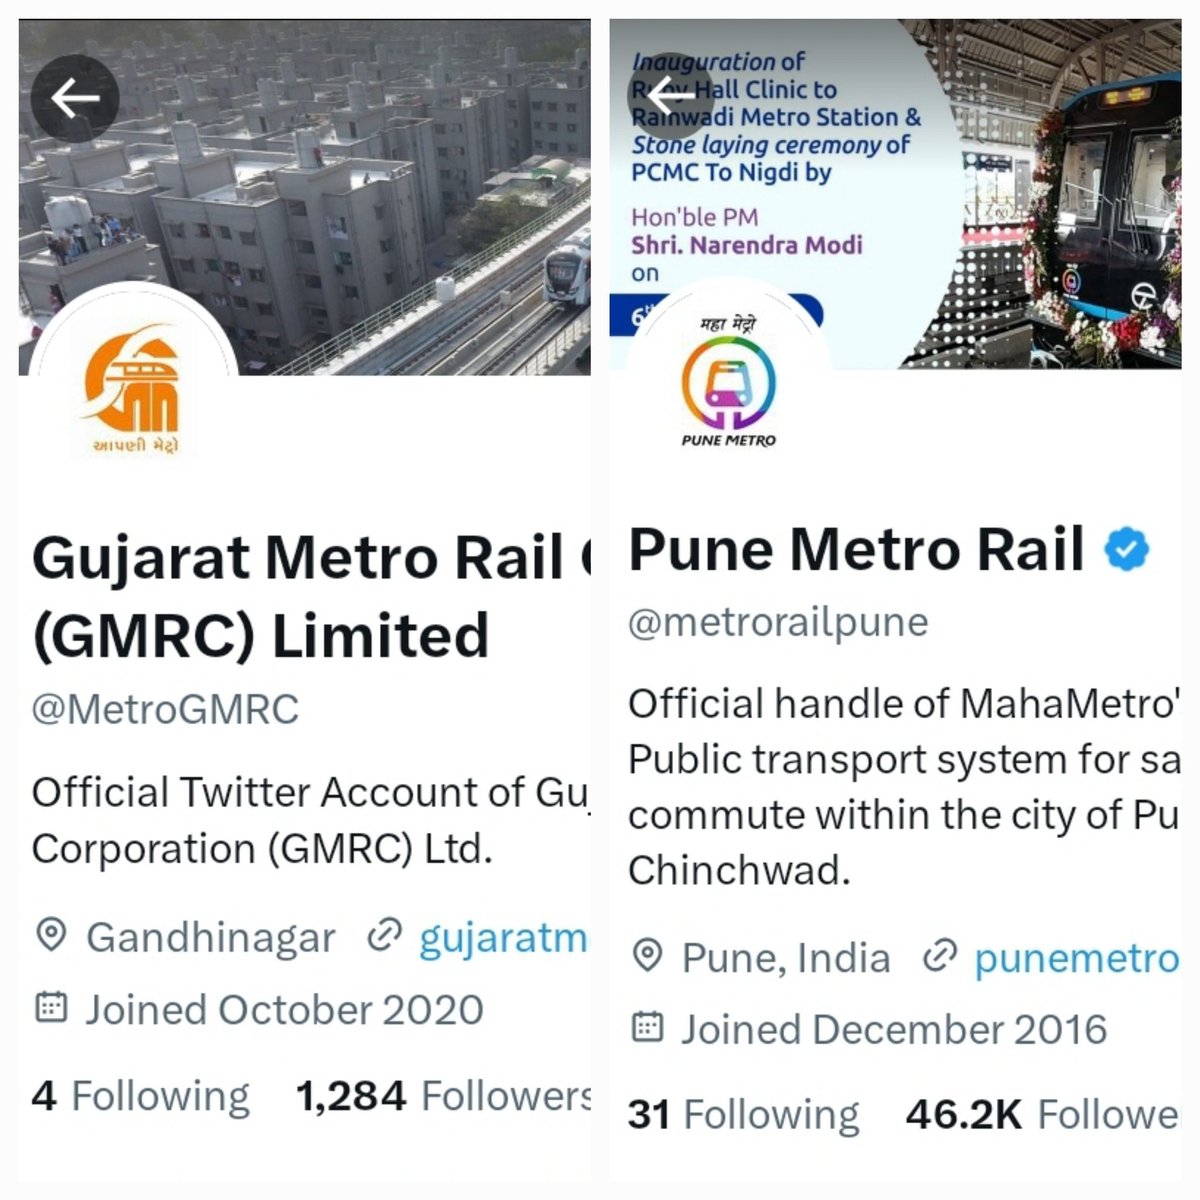 See the diff. In era of IT to be active on SM is must if we have make project successful Ahmedabad 🚇 Phase 1 - 40.03 Km Commencement - 2 Oct2022 Followers - 1284 SM post - 39 Pune 🚇 Phase 1 - 29.8 Km Commencement - 6 Mar2022 Followers - 46.2K SM post - 5,736 Source: Google